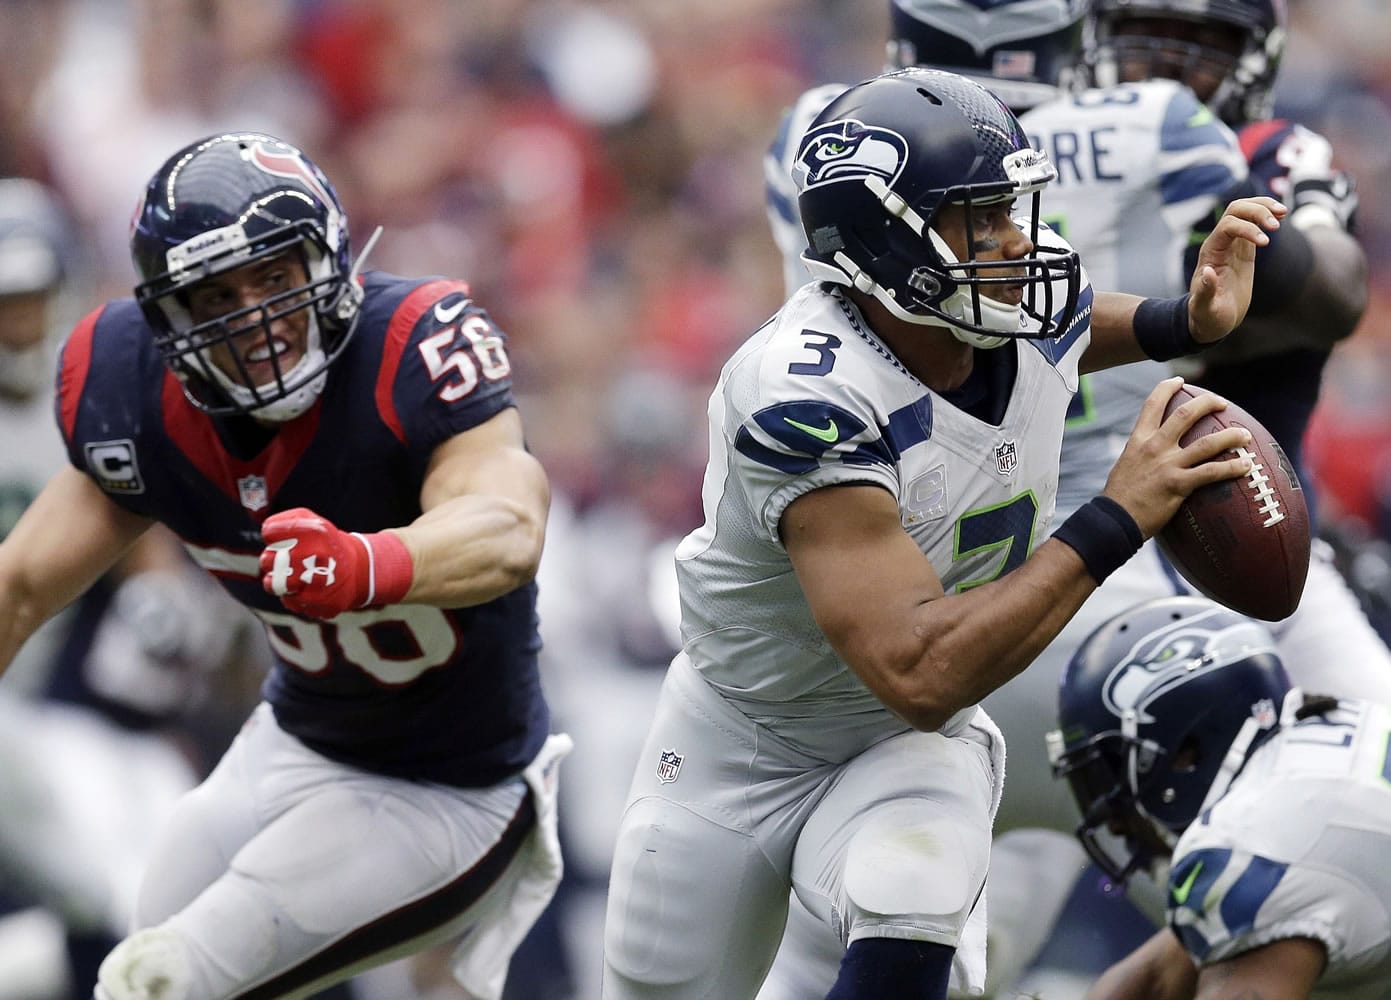 Seattle Seahawks' Russell Wilson (3) is pressured by Houston Texans' Brian Cushing (56) during the third quarter an NFL football game on Sunday, Sept. 29, 2013, in Houston. (AP Photo/David J.